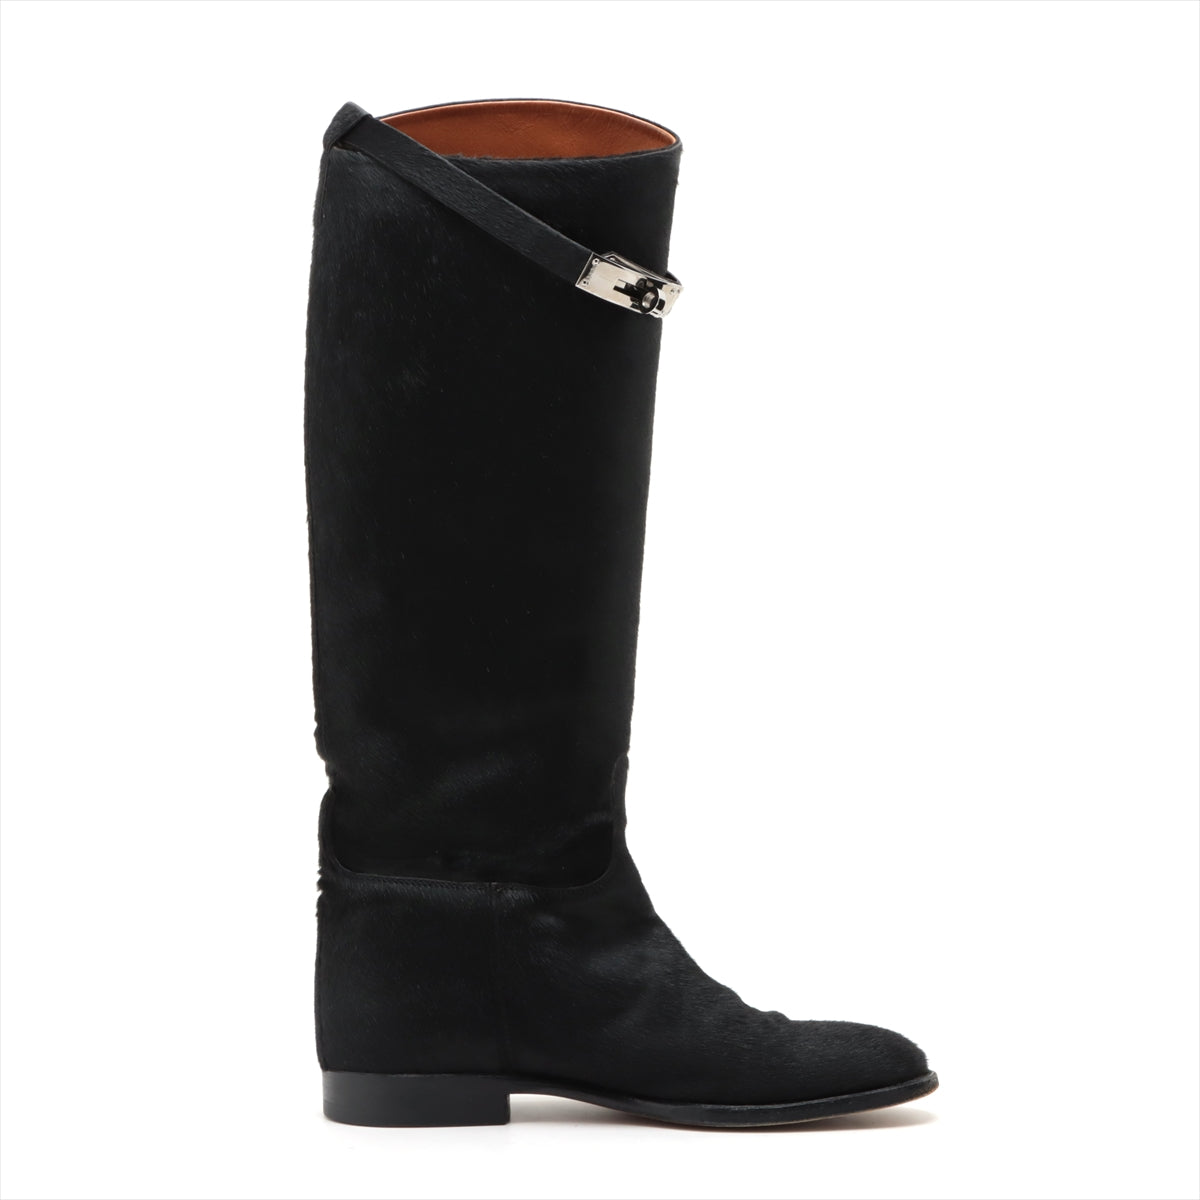 Hermès Leather & unborn calf Long boots 37 Ladies' Black jumping Kelly metal fittings Has a star mark Sold goods